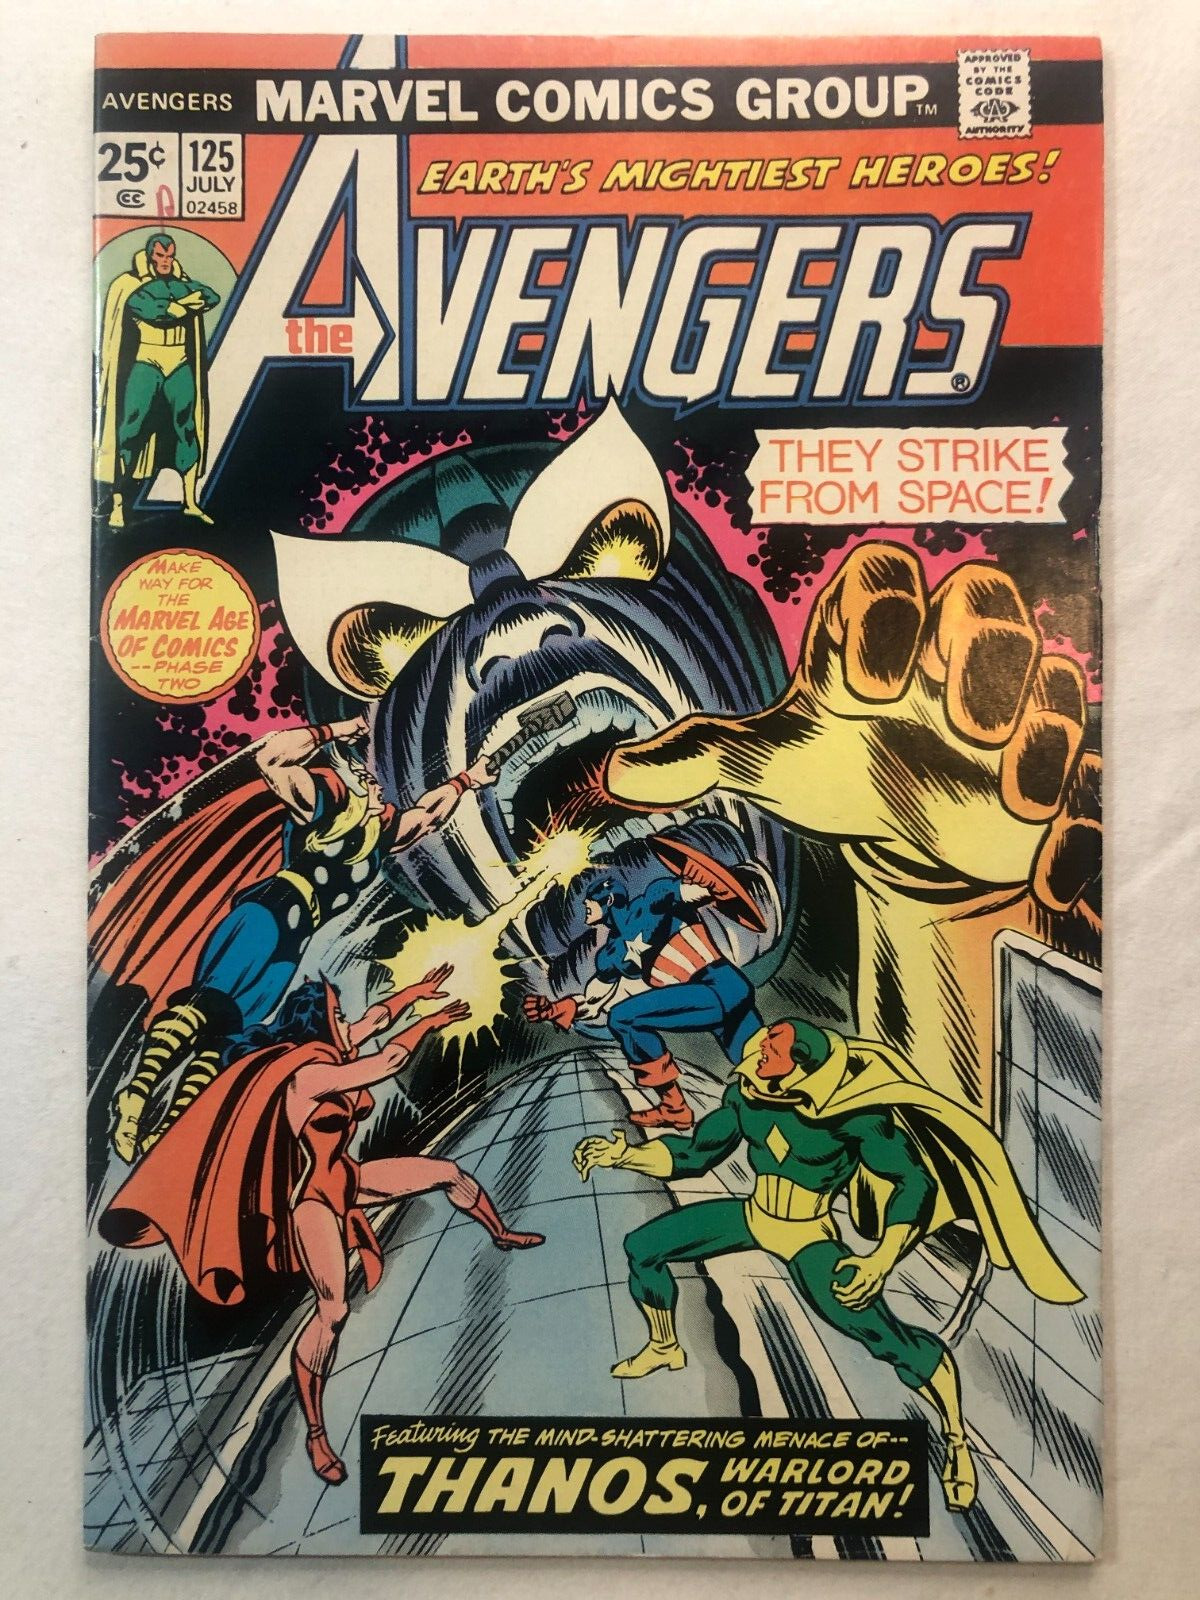 Avengers #125 July 1974 Vintage Bronze Age Marvel Comics Very Nice Condition